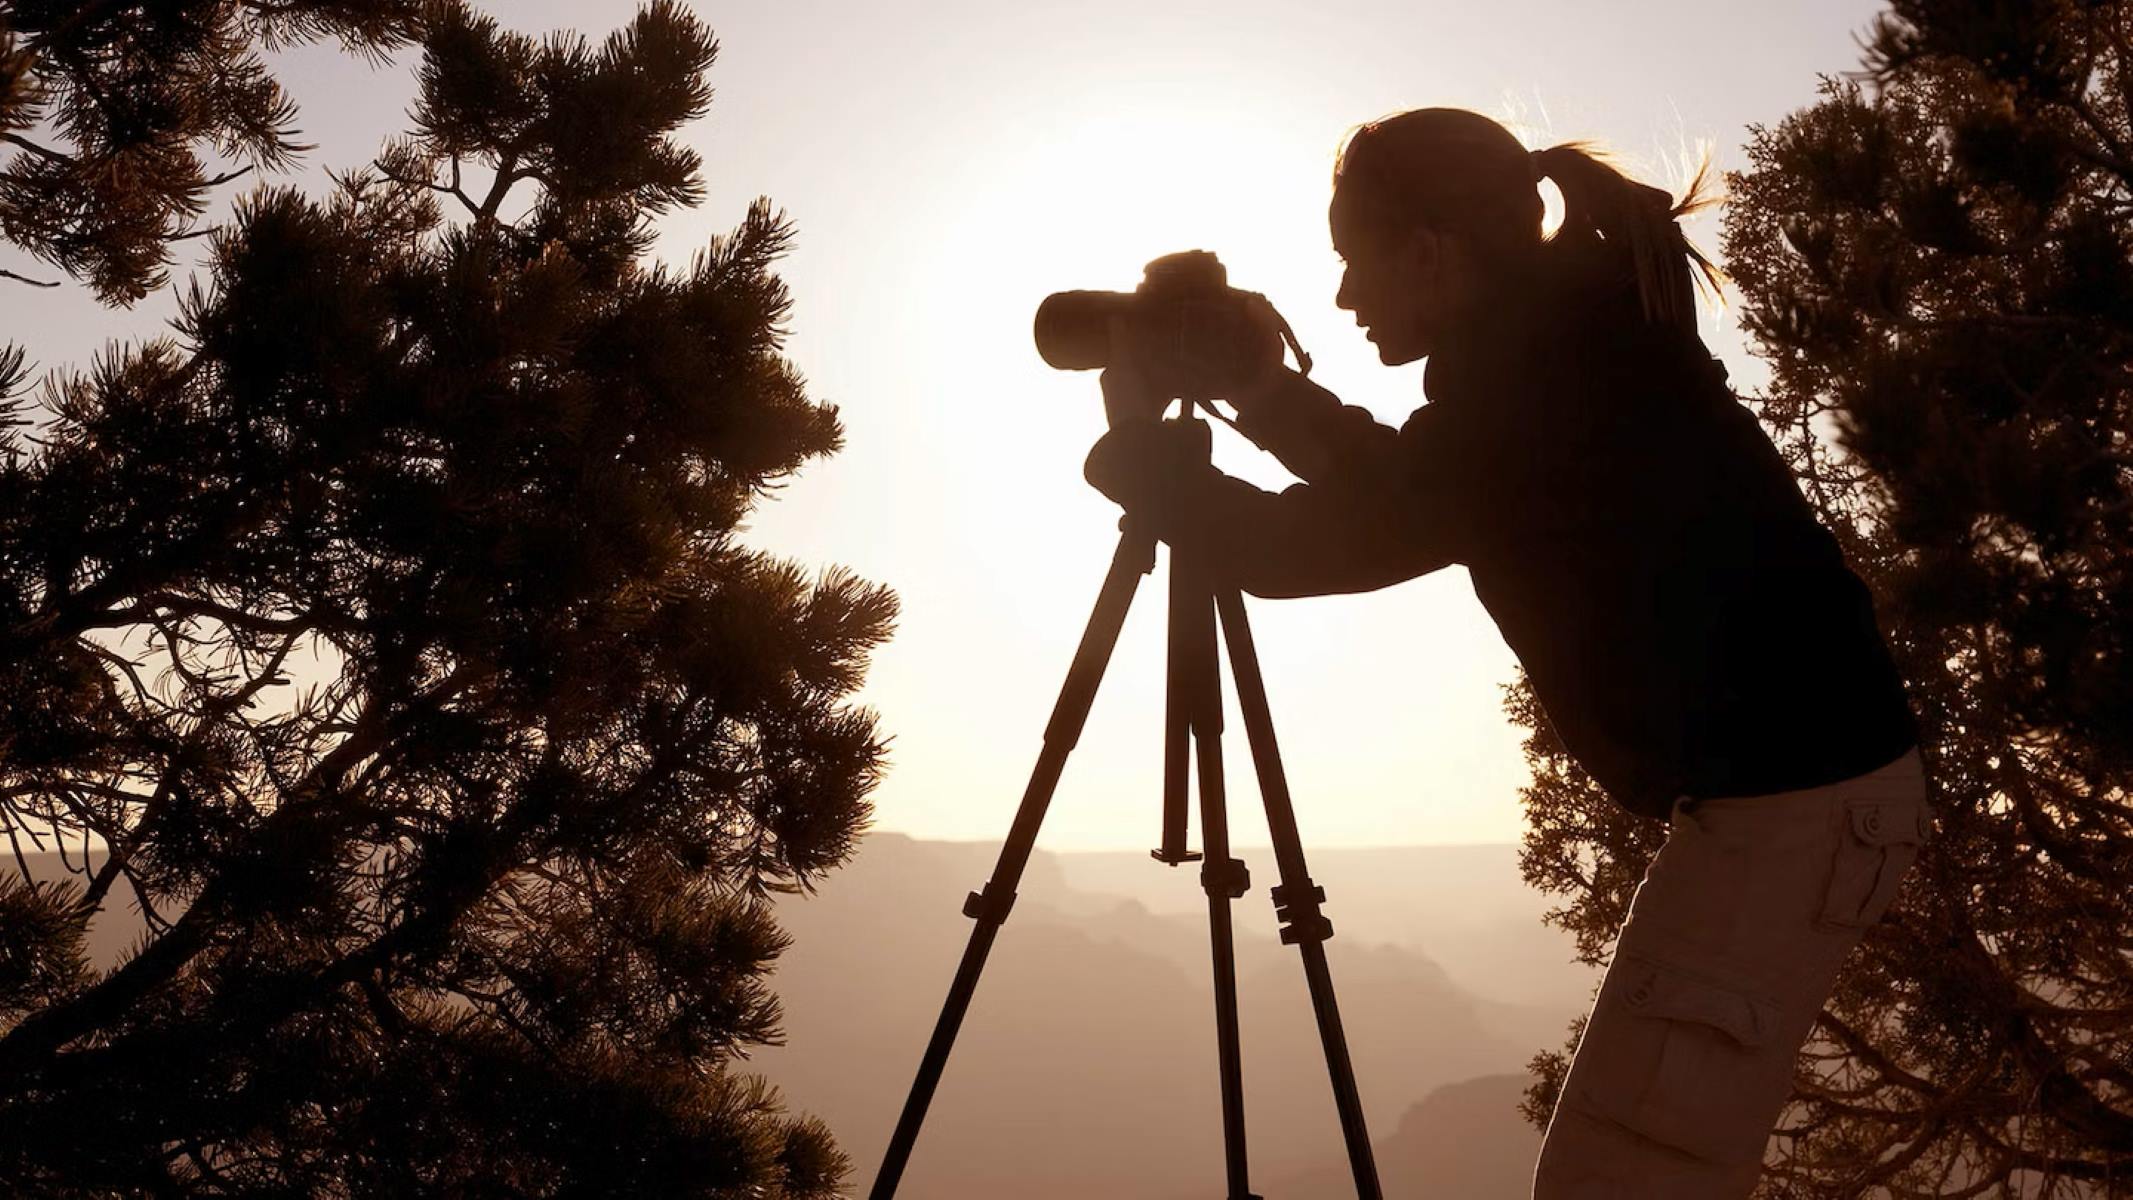 A Guide To Effectively Using Your Camera Tripod